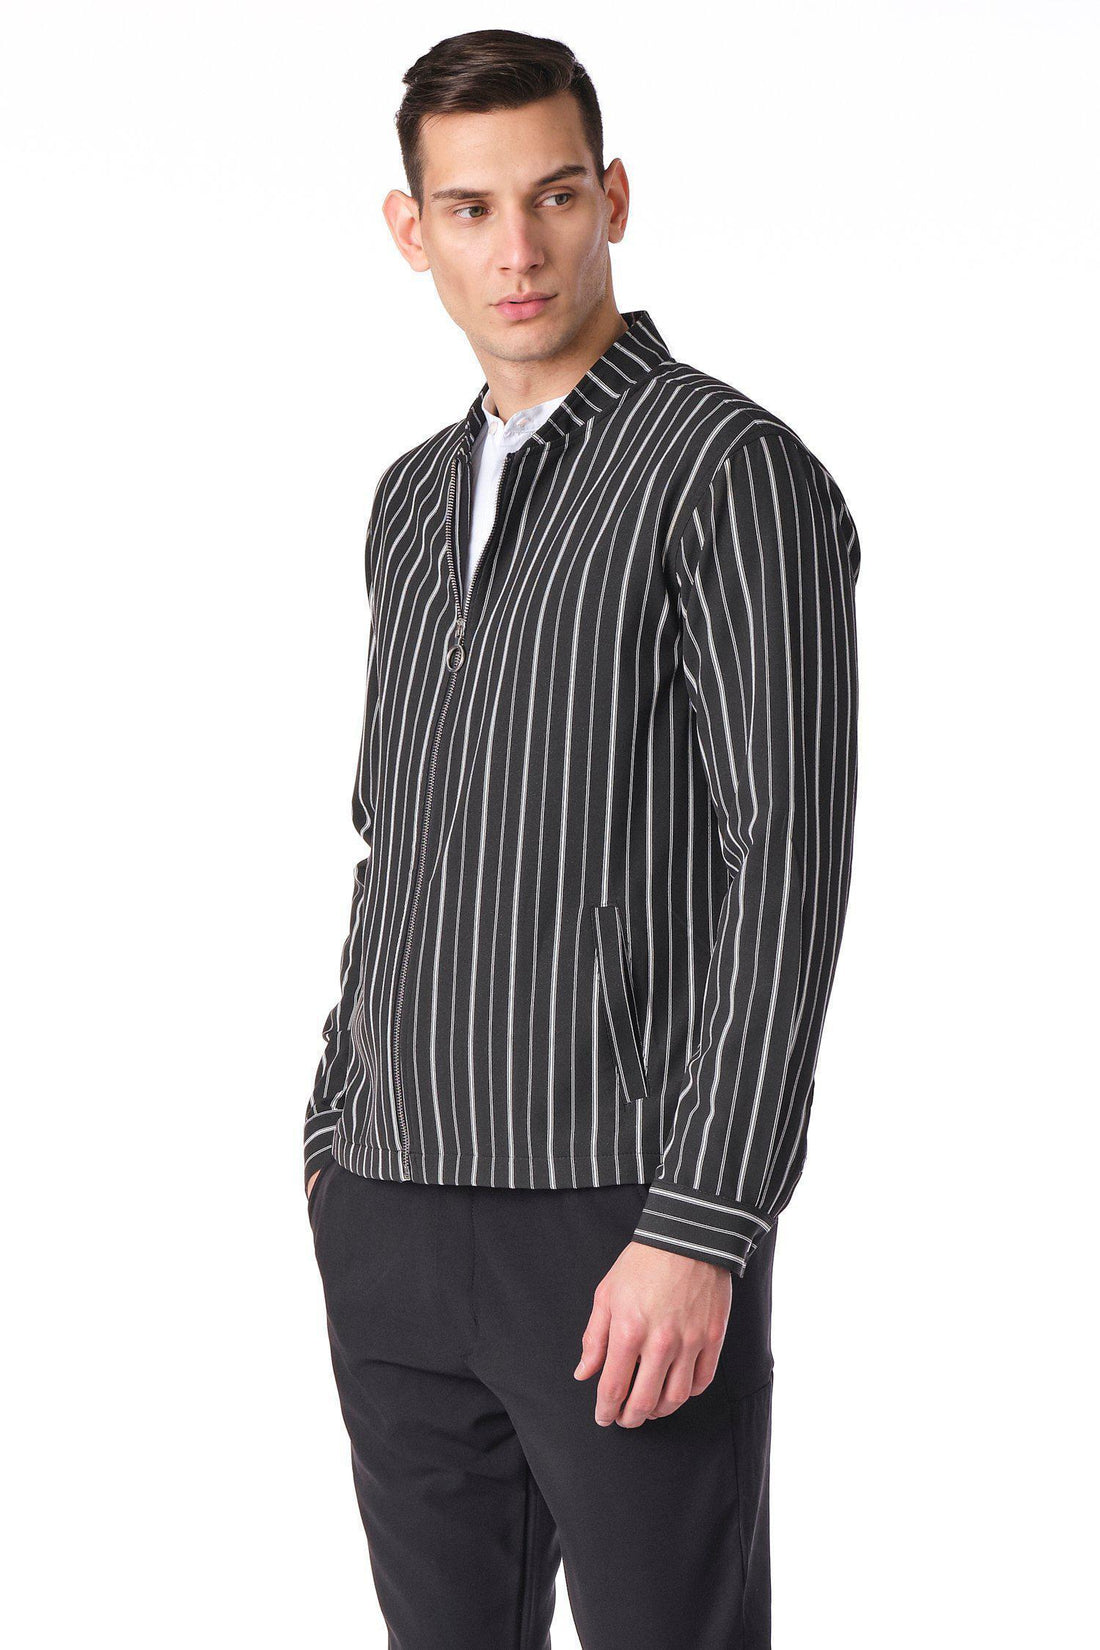 Zip-up shell jacket featuring a black and white pinstripe pattern.